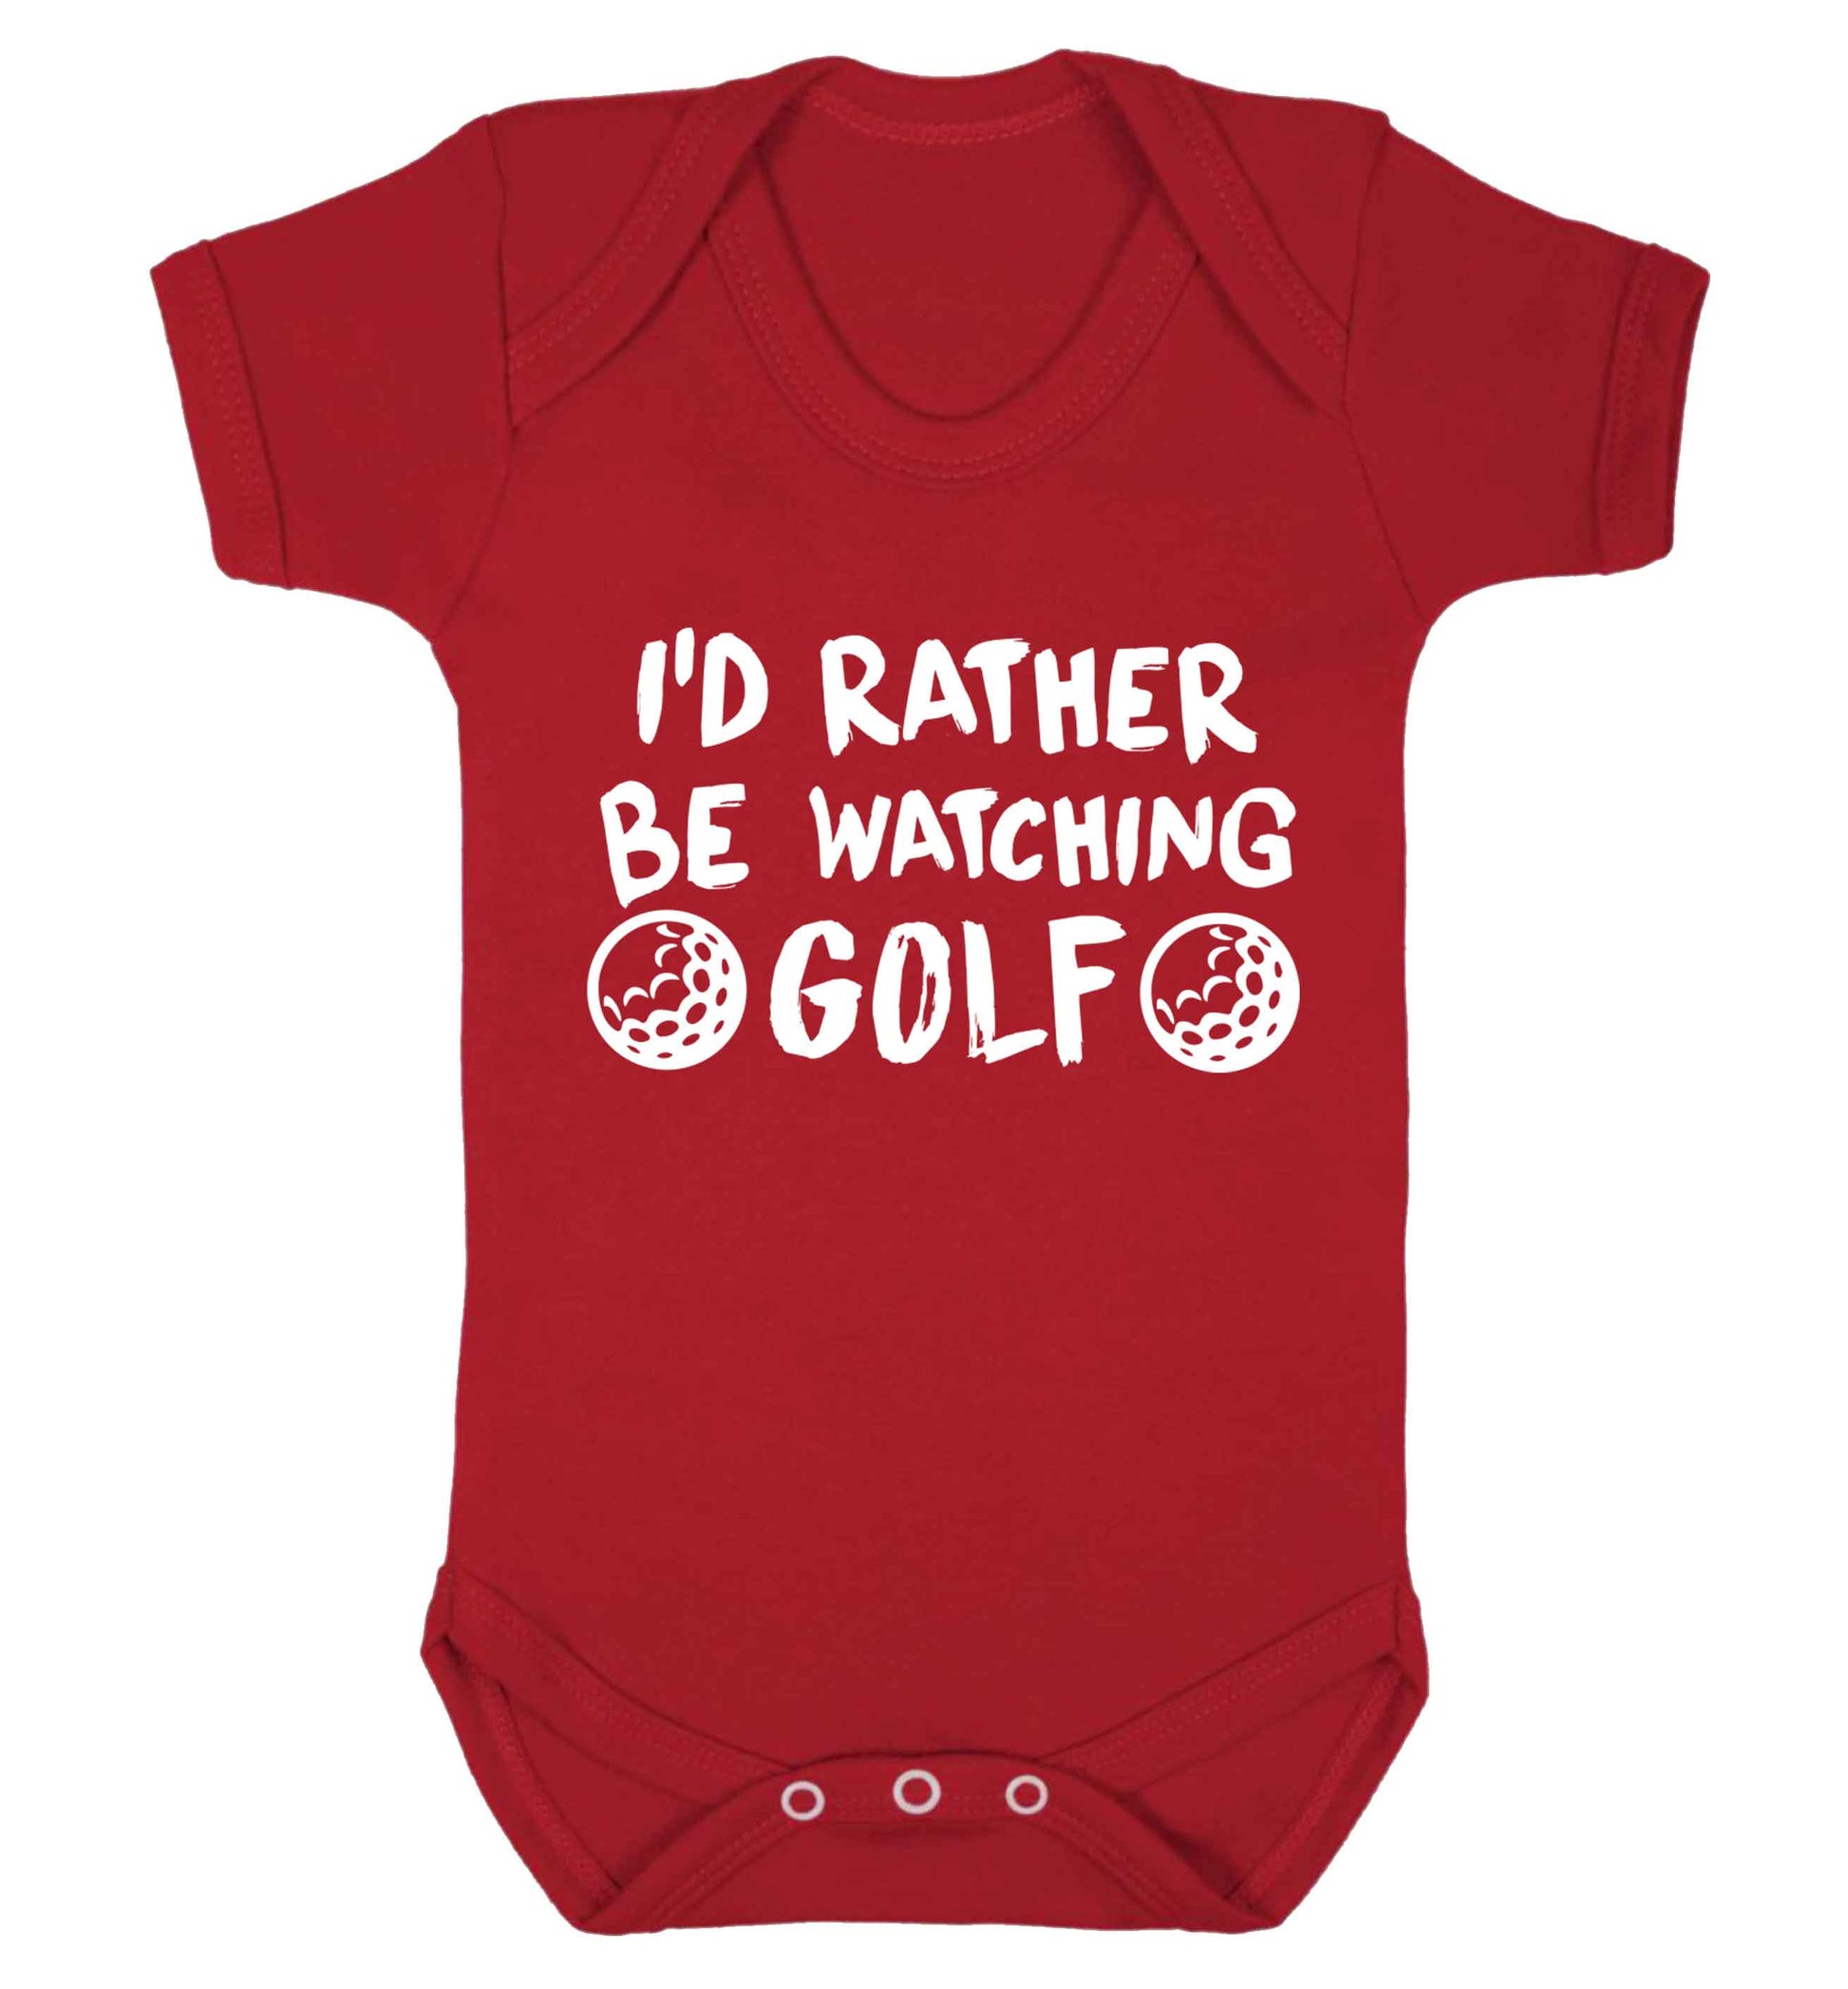 I'd rather be watching golf Baby Vest red 18-24 months